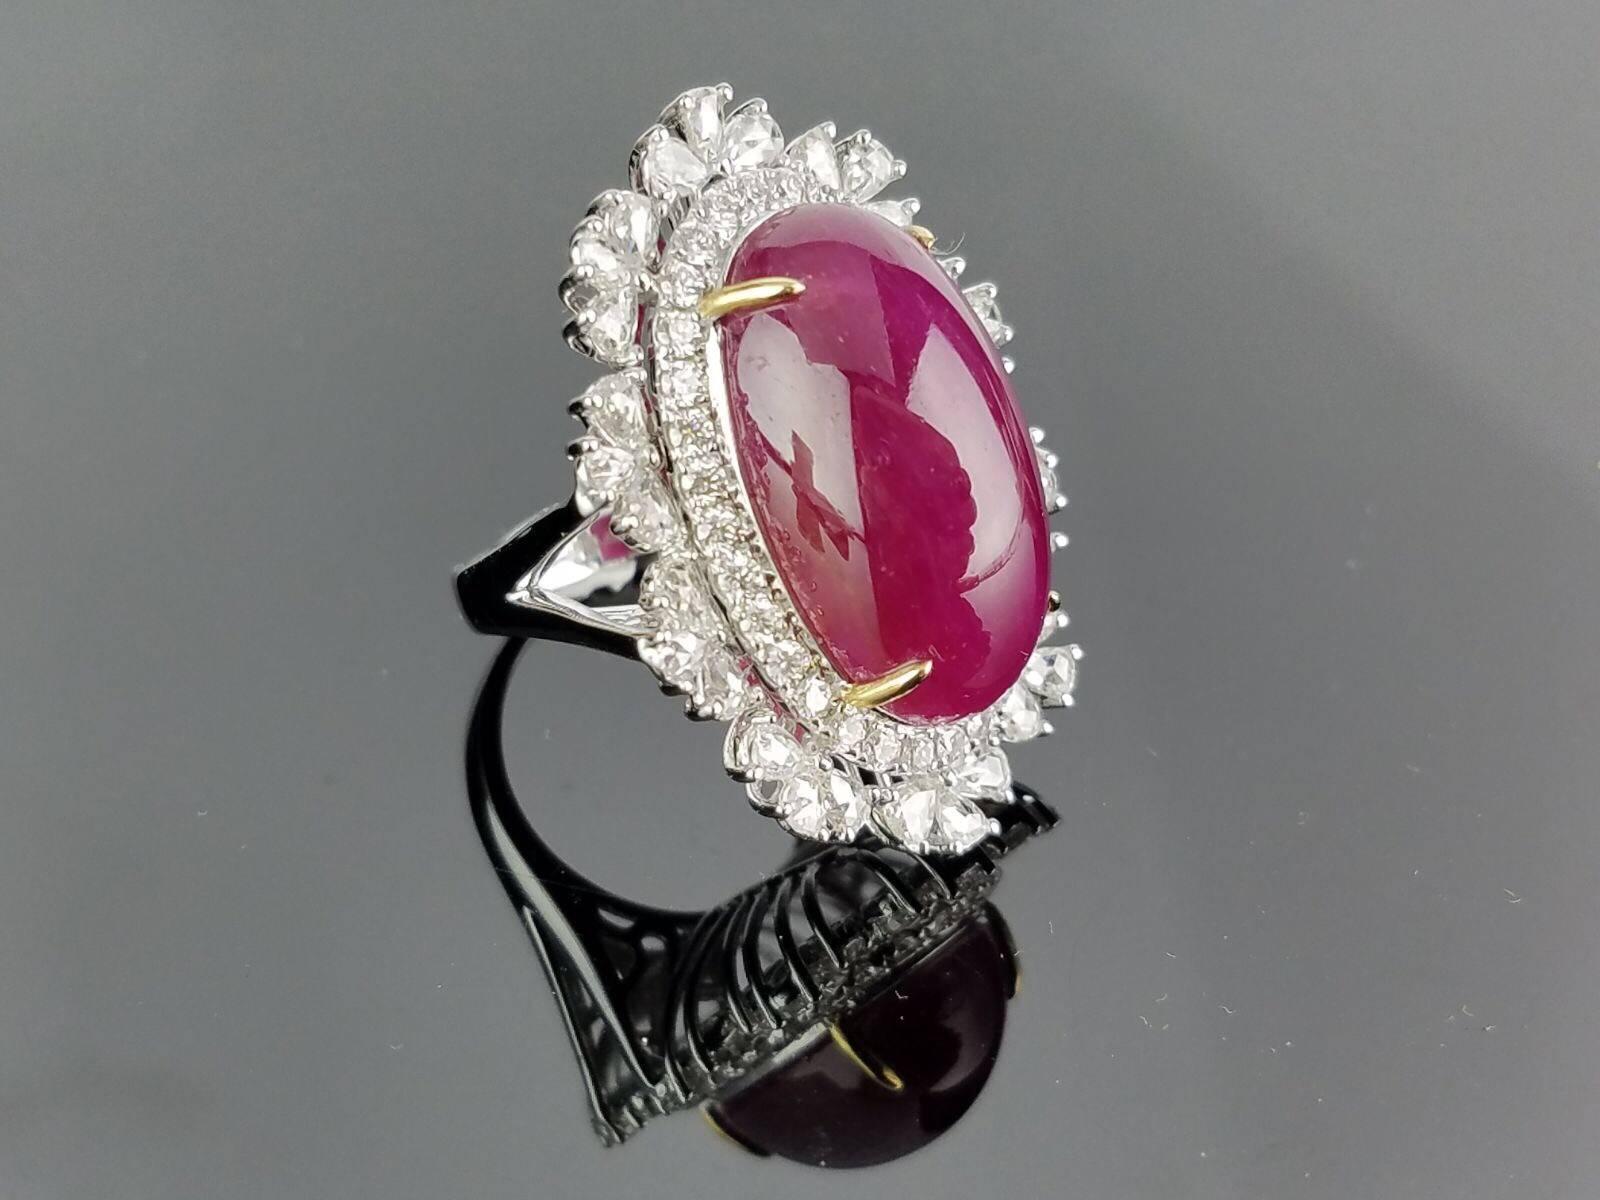 Statement Burmese Ruby (heat) ornamented with rose cut and brilliant cut white Diamonds, all set in 18K white Gold,

Stone Details: 
Stone: Burmese Ruby
Cut: Oval Cabochon
Carat Weight: 20.33 Carat

Diamond Details:
Cut: Brilliant cut / Rose